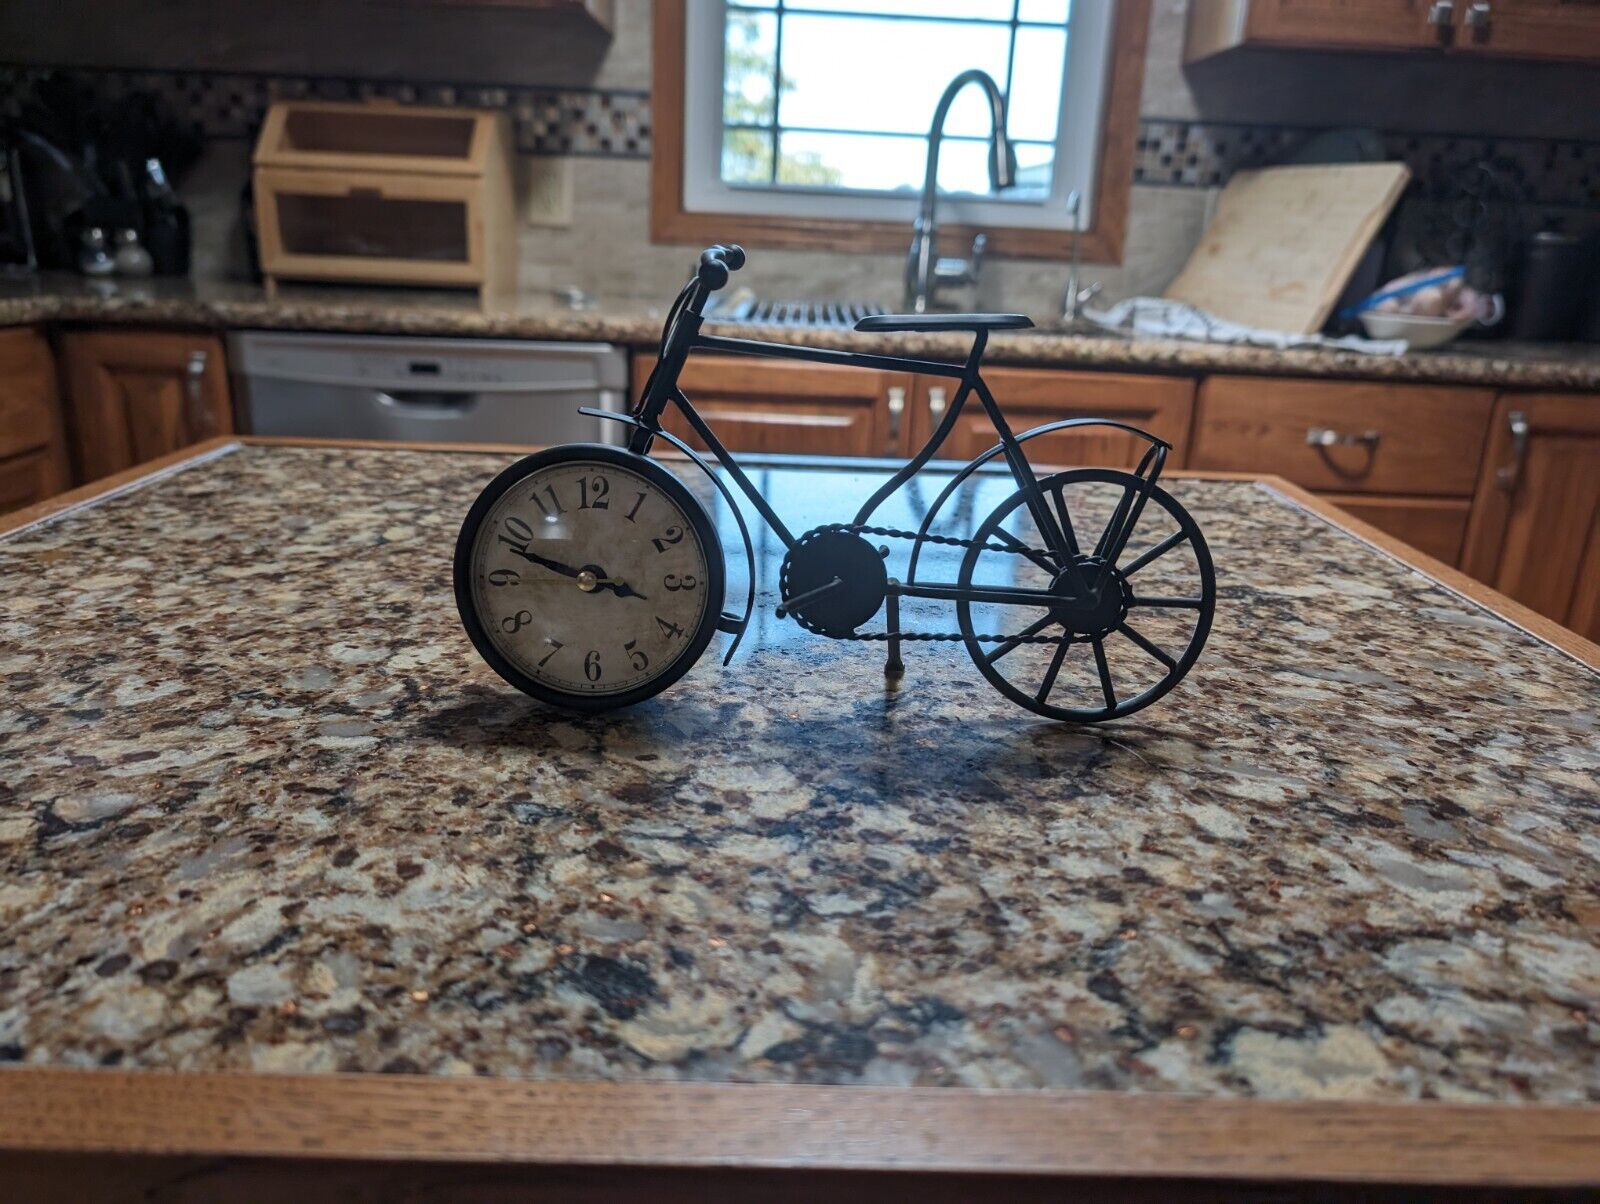 Metal Bicycle Desk Clock Classic Old Fashioned Decorative Clock